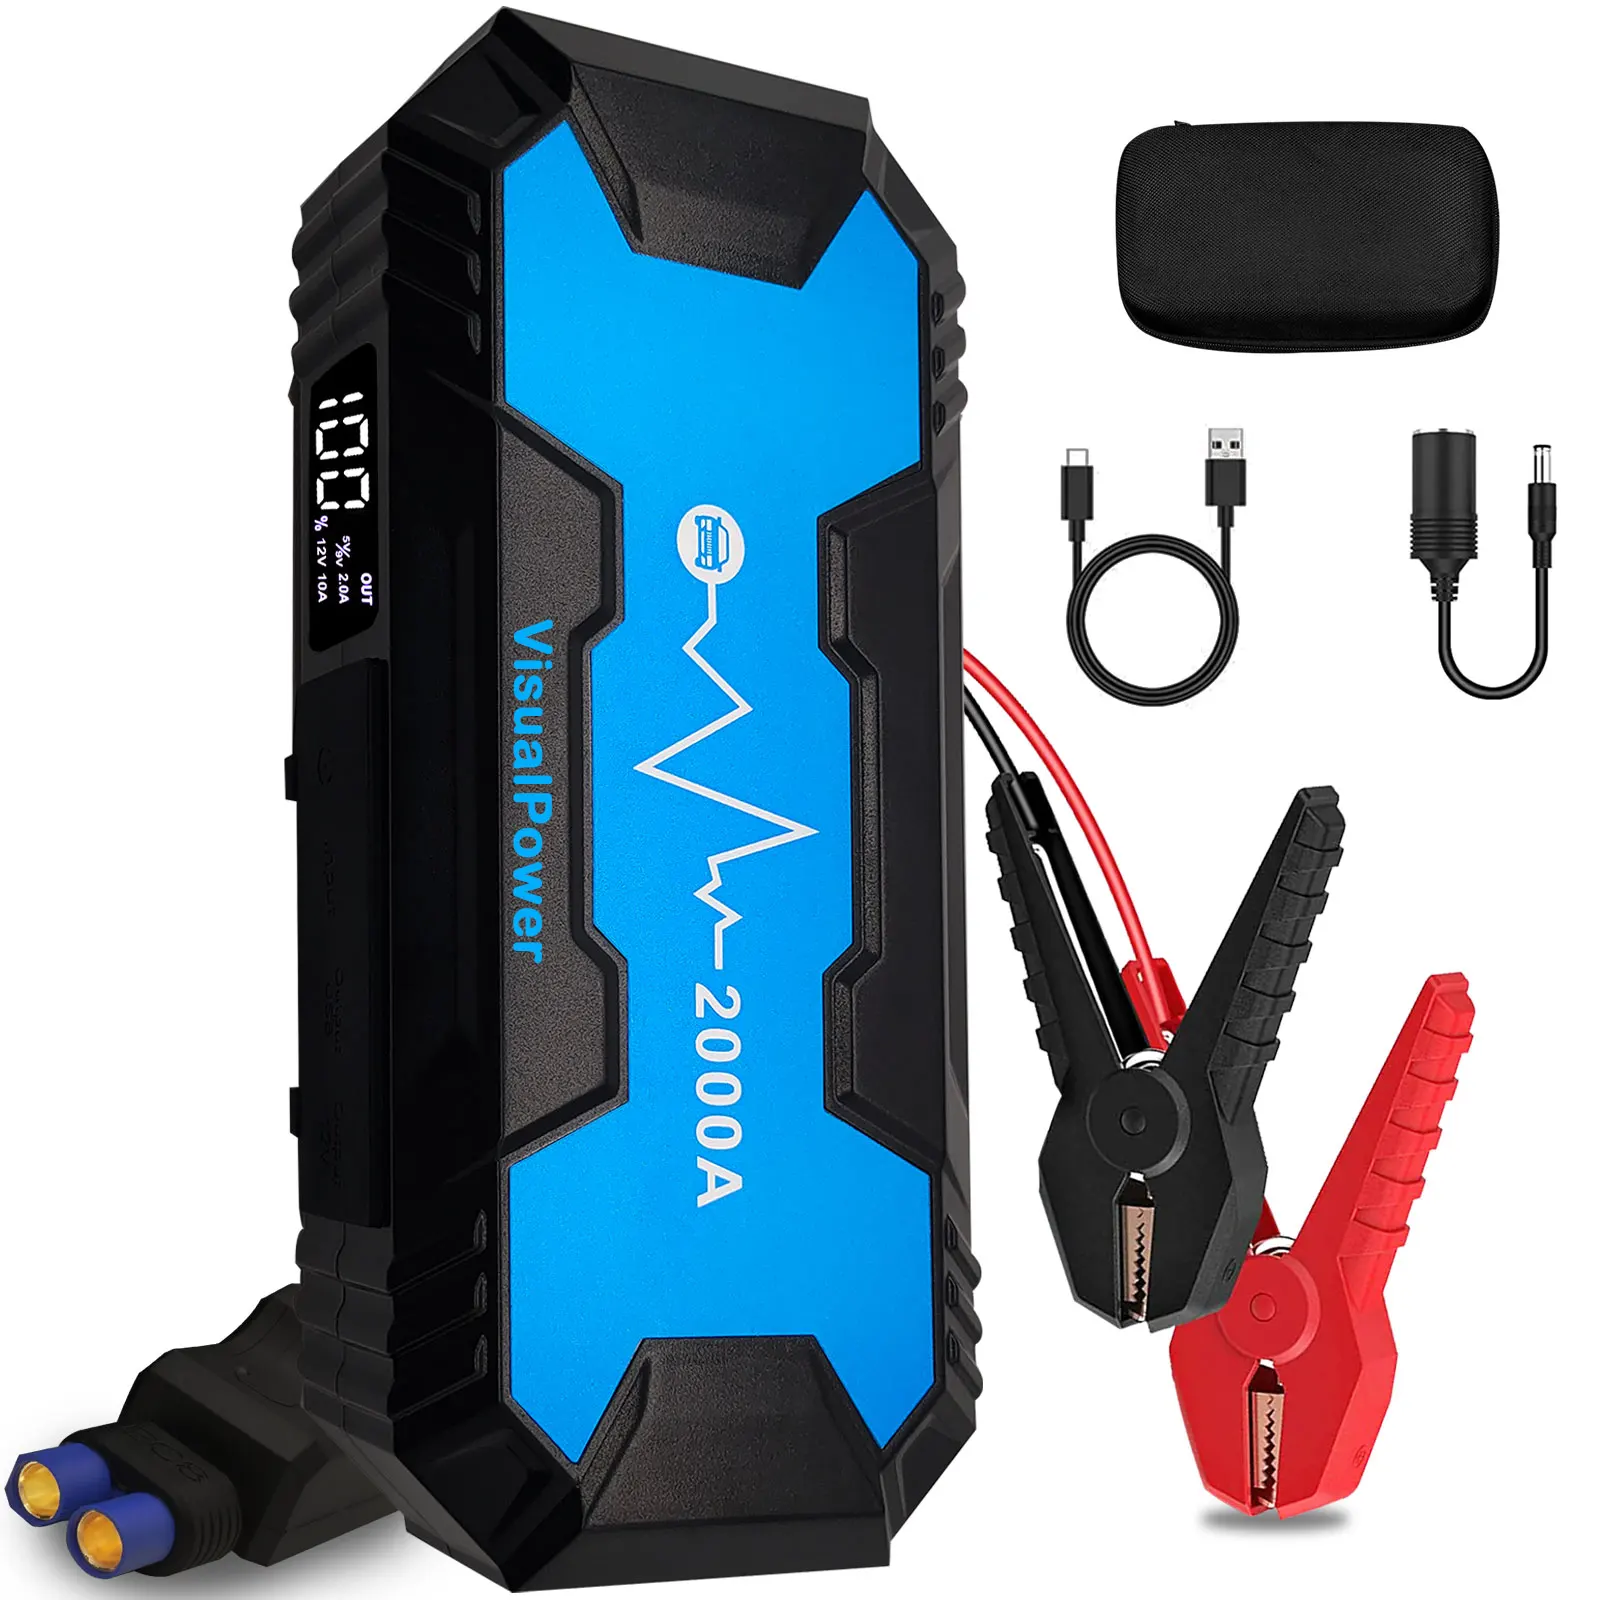 

COSSIFTW 12V Booster Power Pack 2000A Jump Starter EC8 Jumper Clamp For 6.0L Gasoline And 8.0L Diesel Vehicles